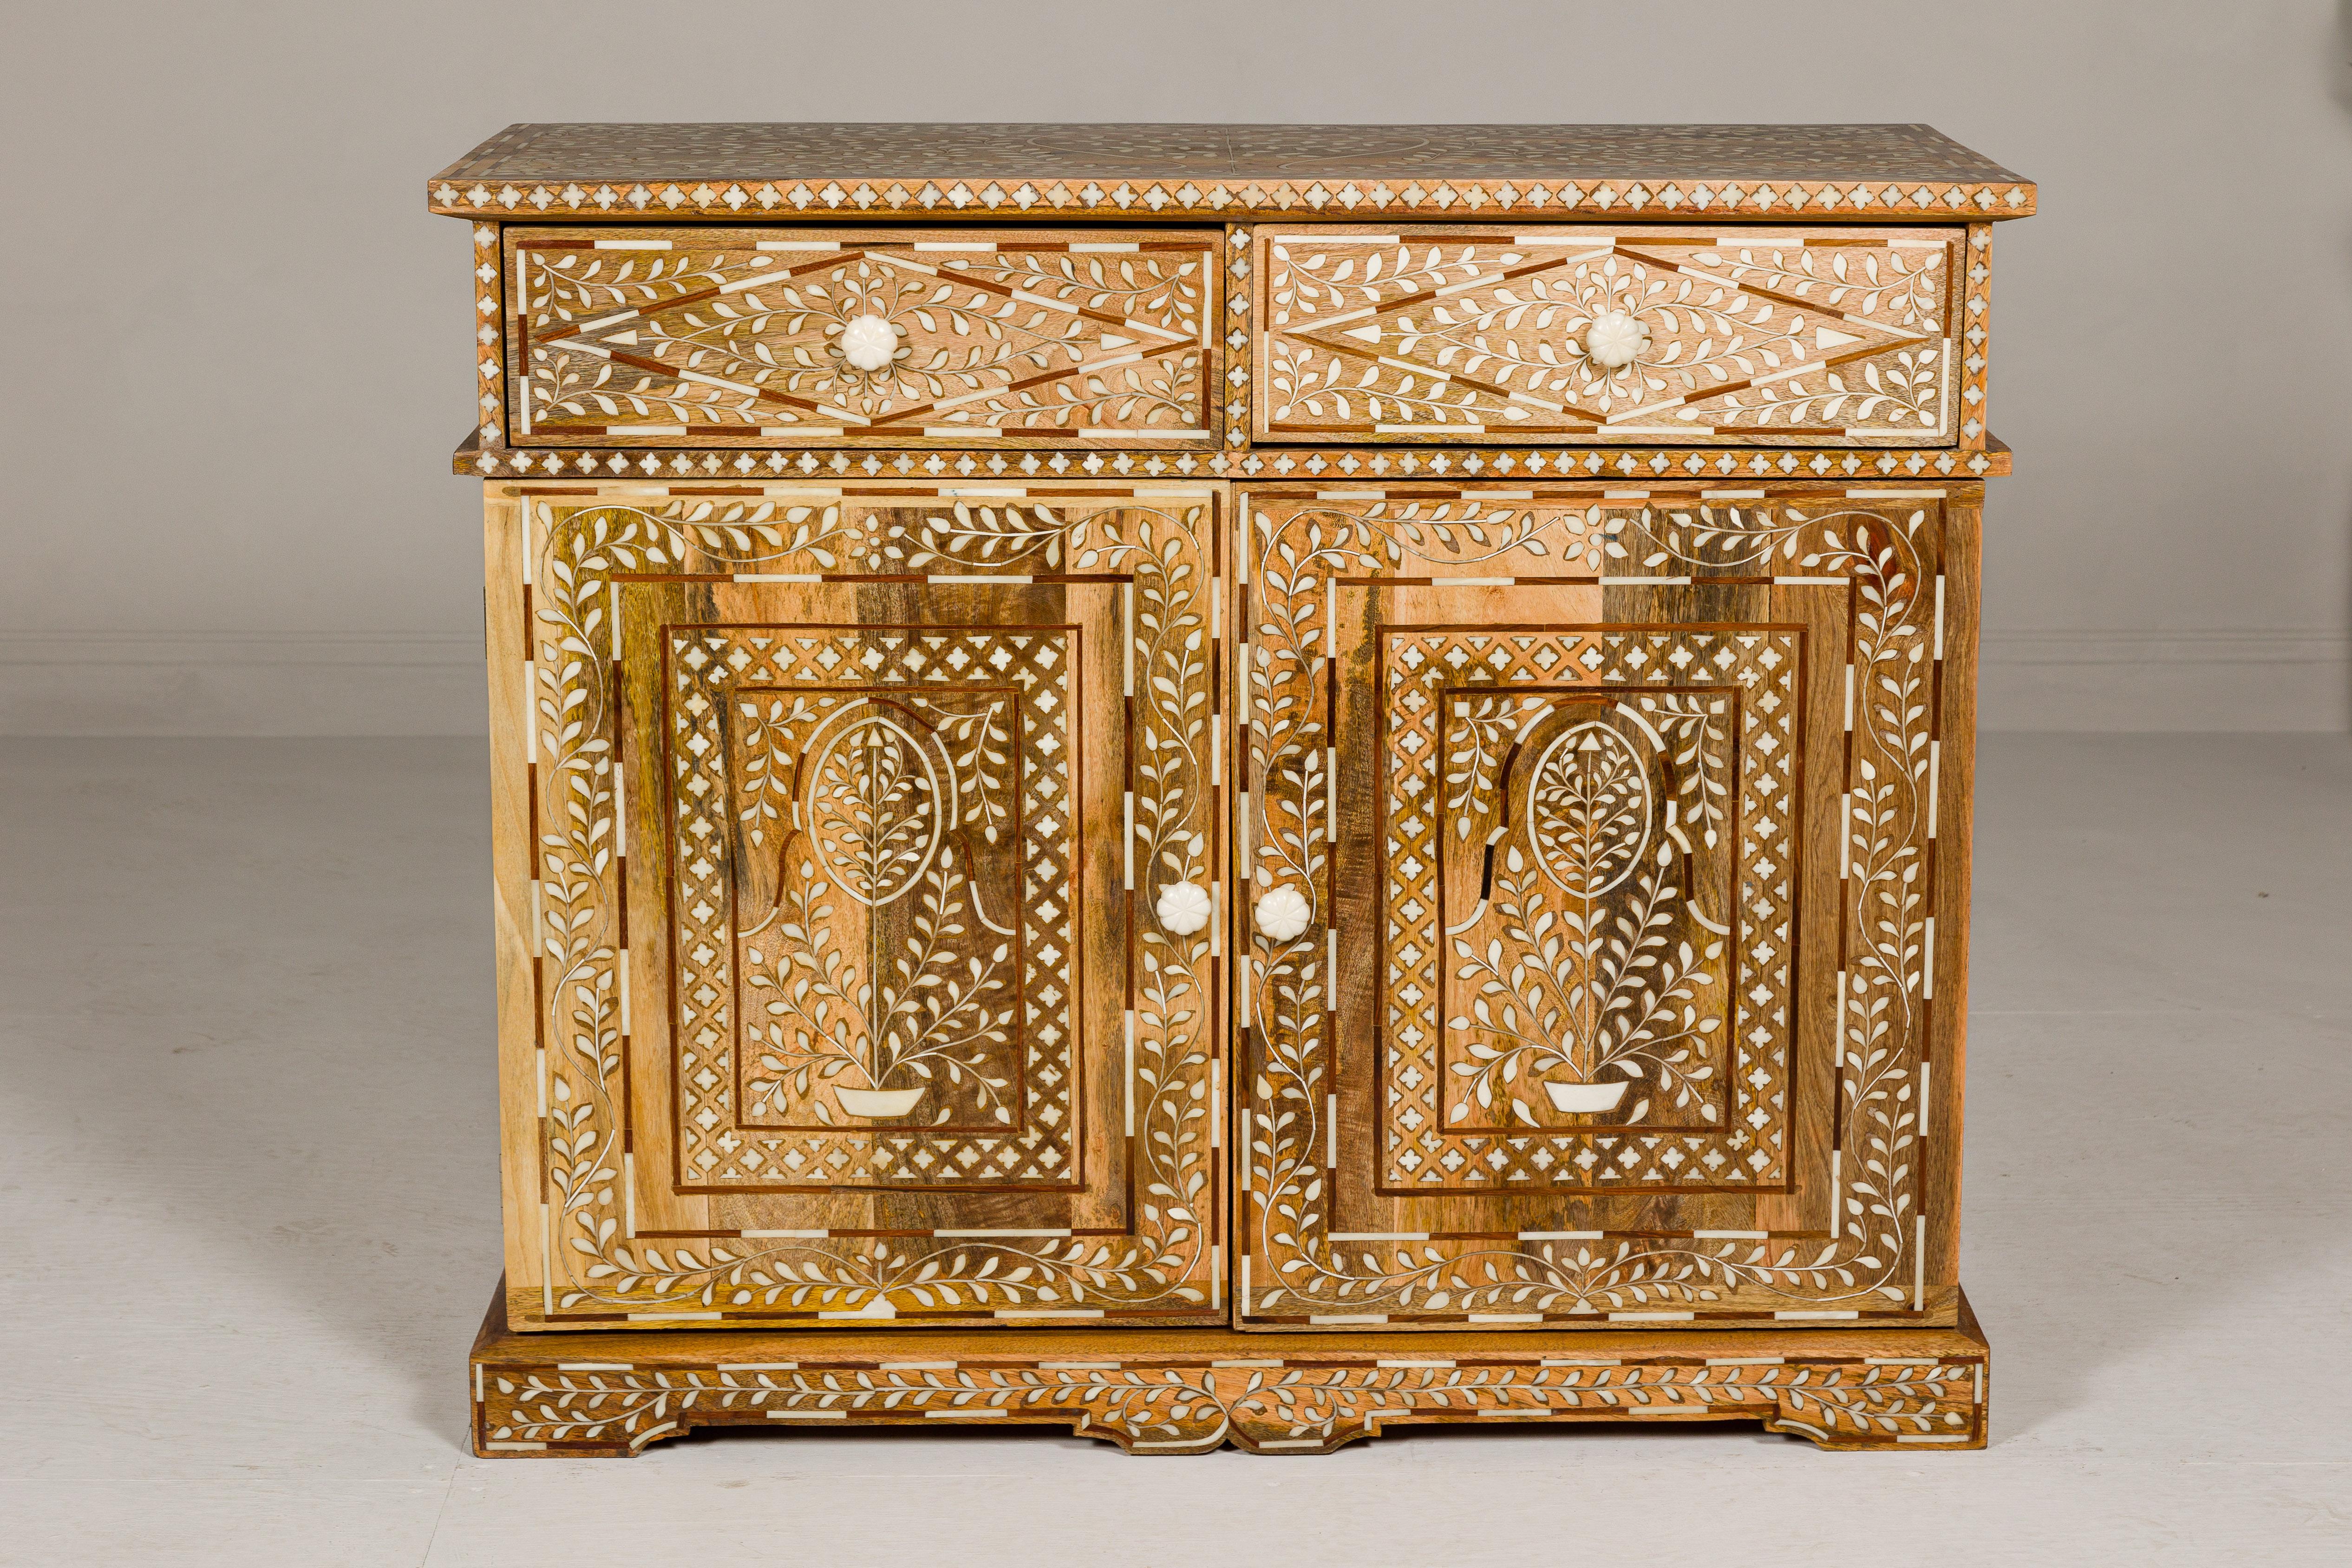 An Anglo-Indian style mango wood buffet with two drawers over two doors, lighter patina and bone hardware. This Anglo-Indian style mango wood buffet is a masterpiece of craftsmanship and design, exuding timeless elegance and artistic flair. With its